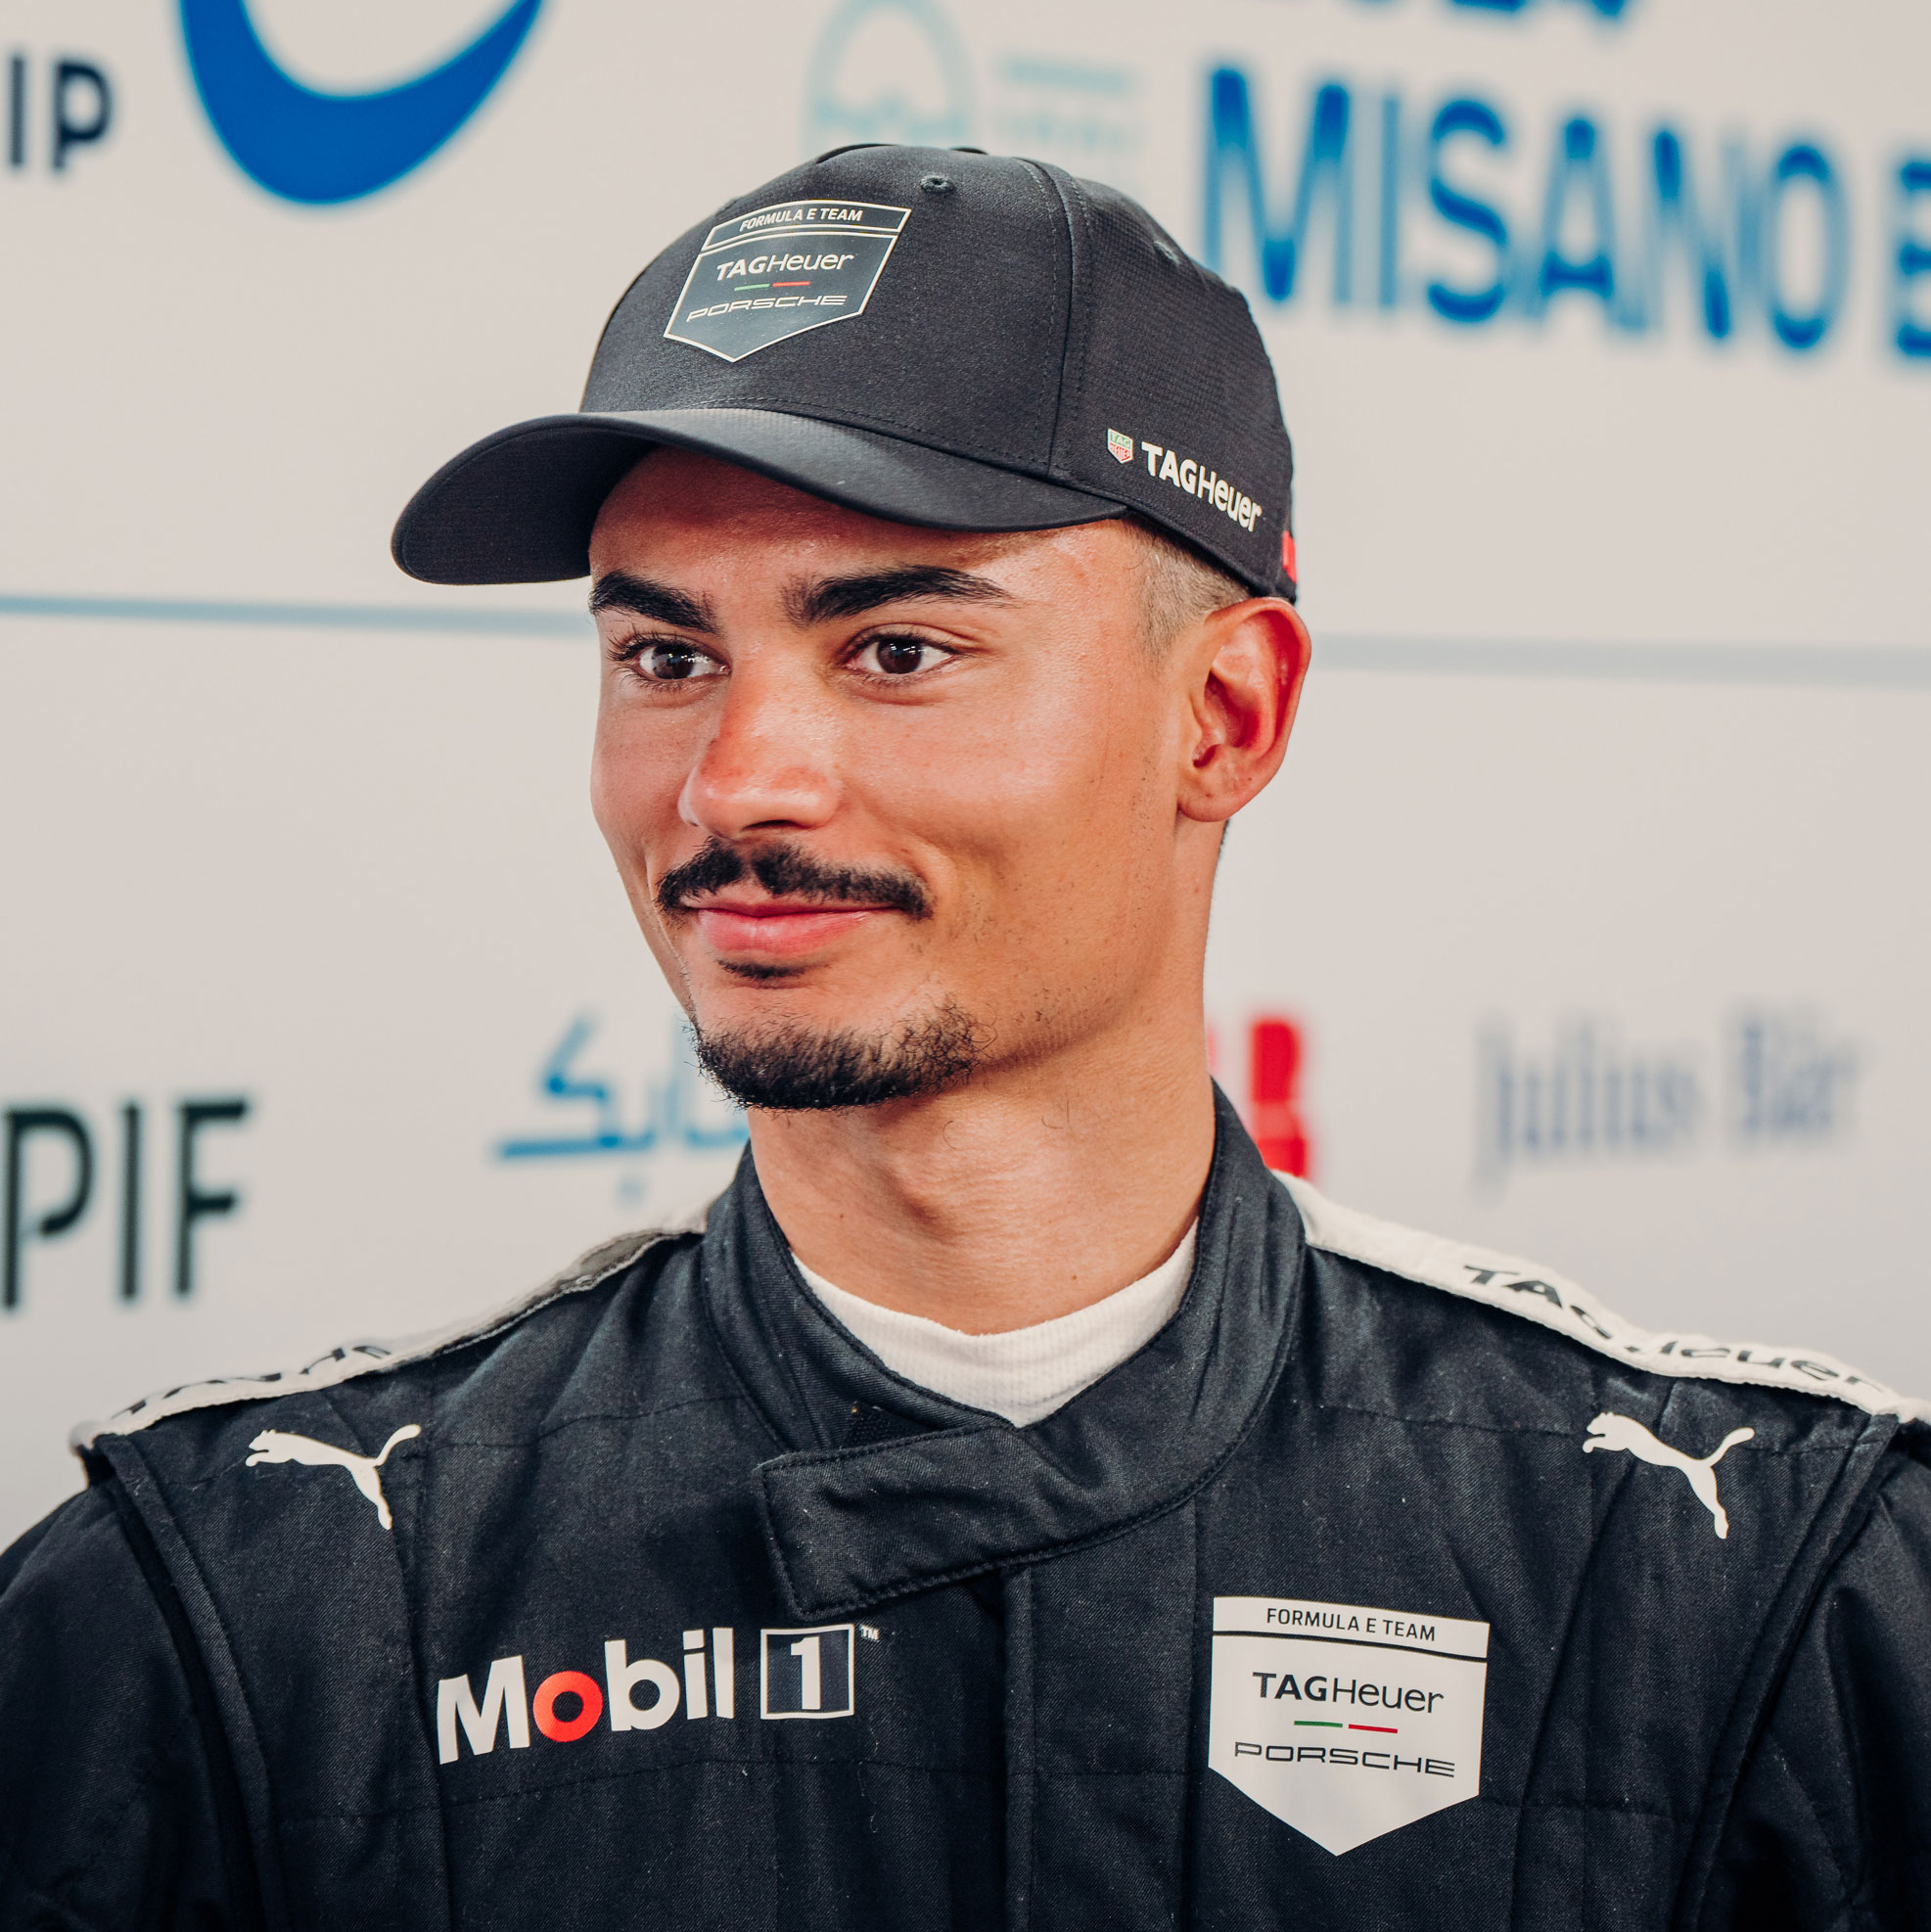 WEHRLEIN TAKES AN EXCELLENT P3 IN MISANO QUALIFYING